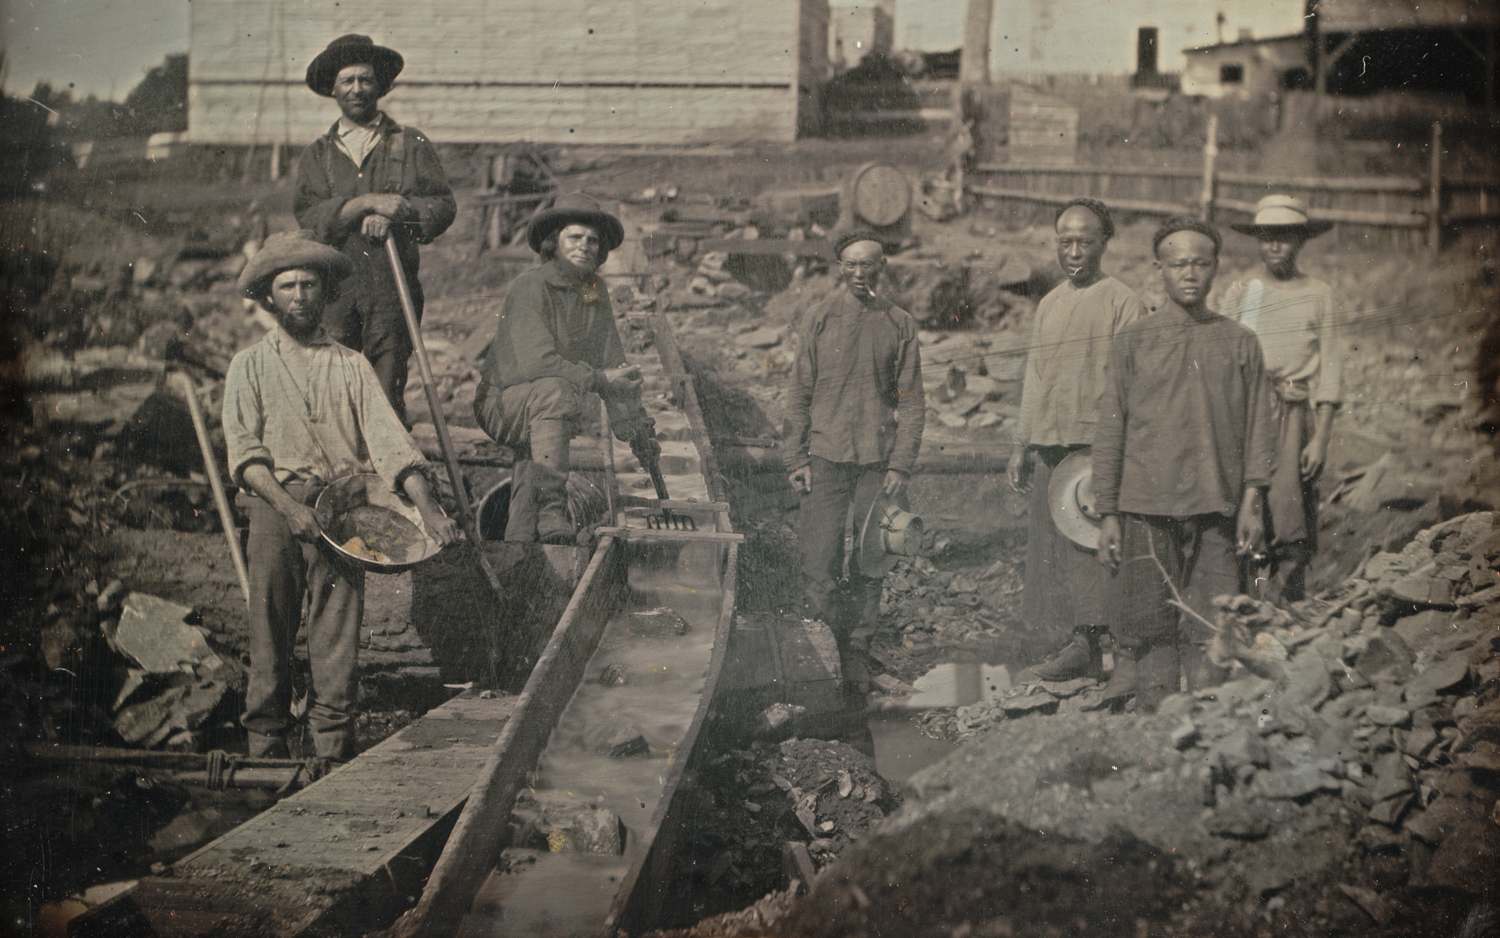 White and Chinese workers pose for a photo at a gold mining site.